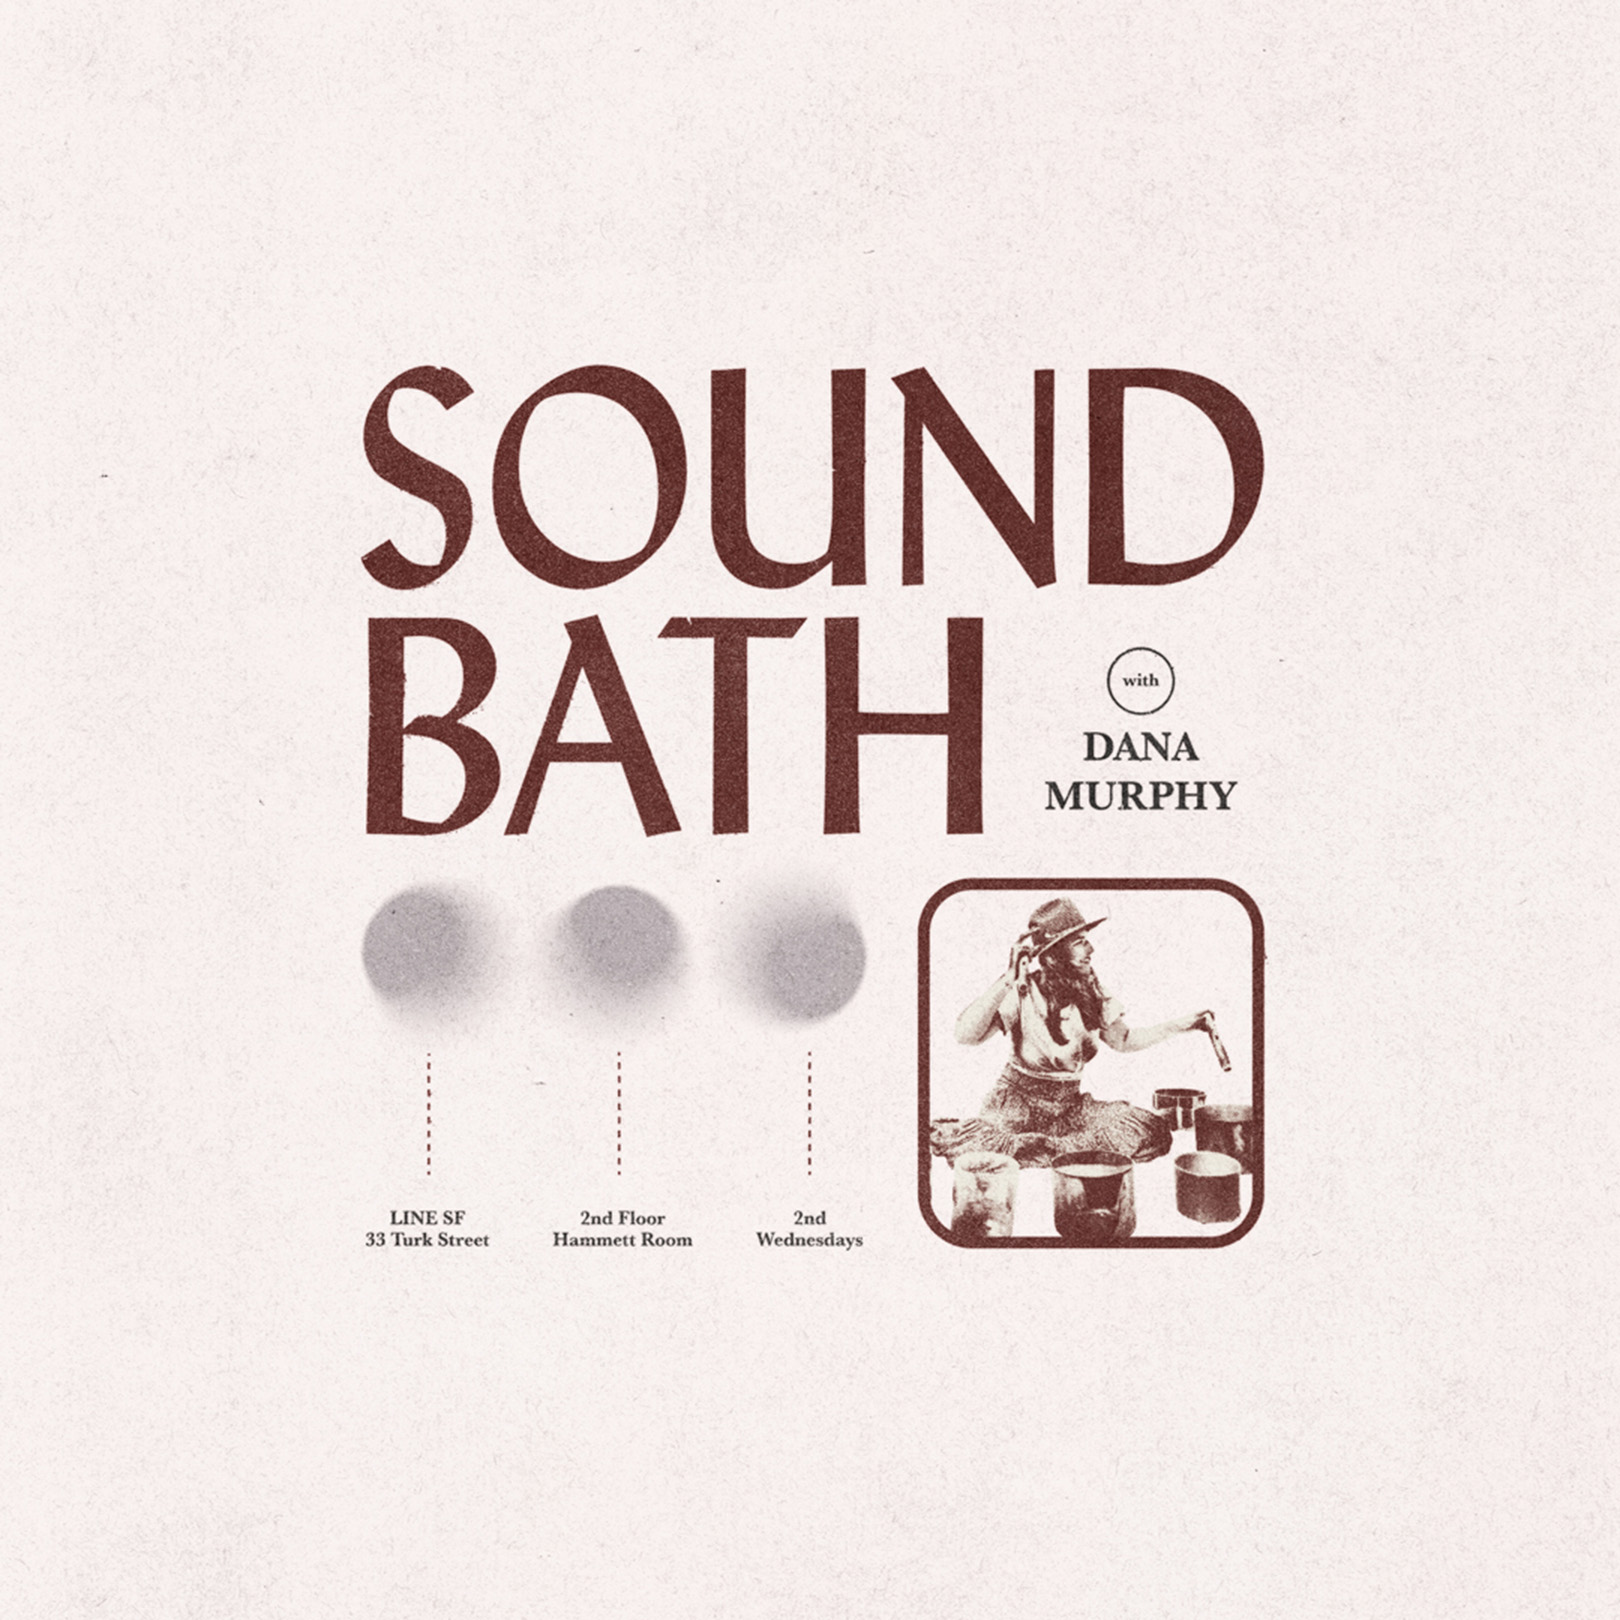 Sound Bath Banner in red letters